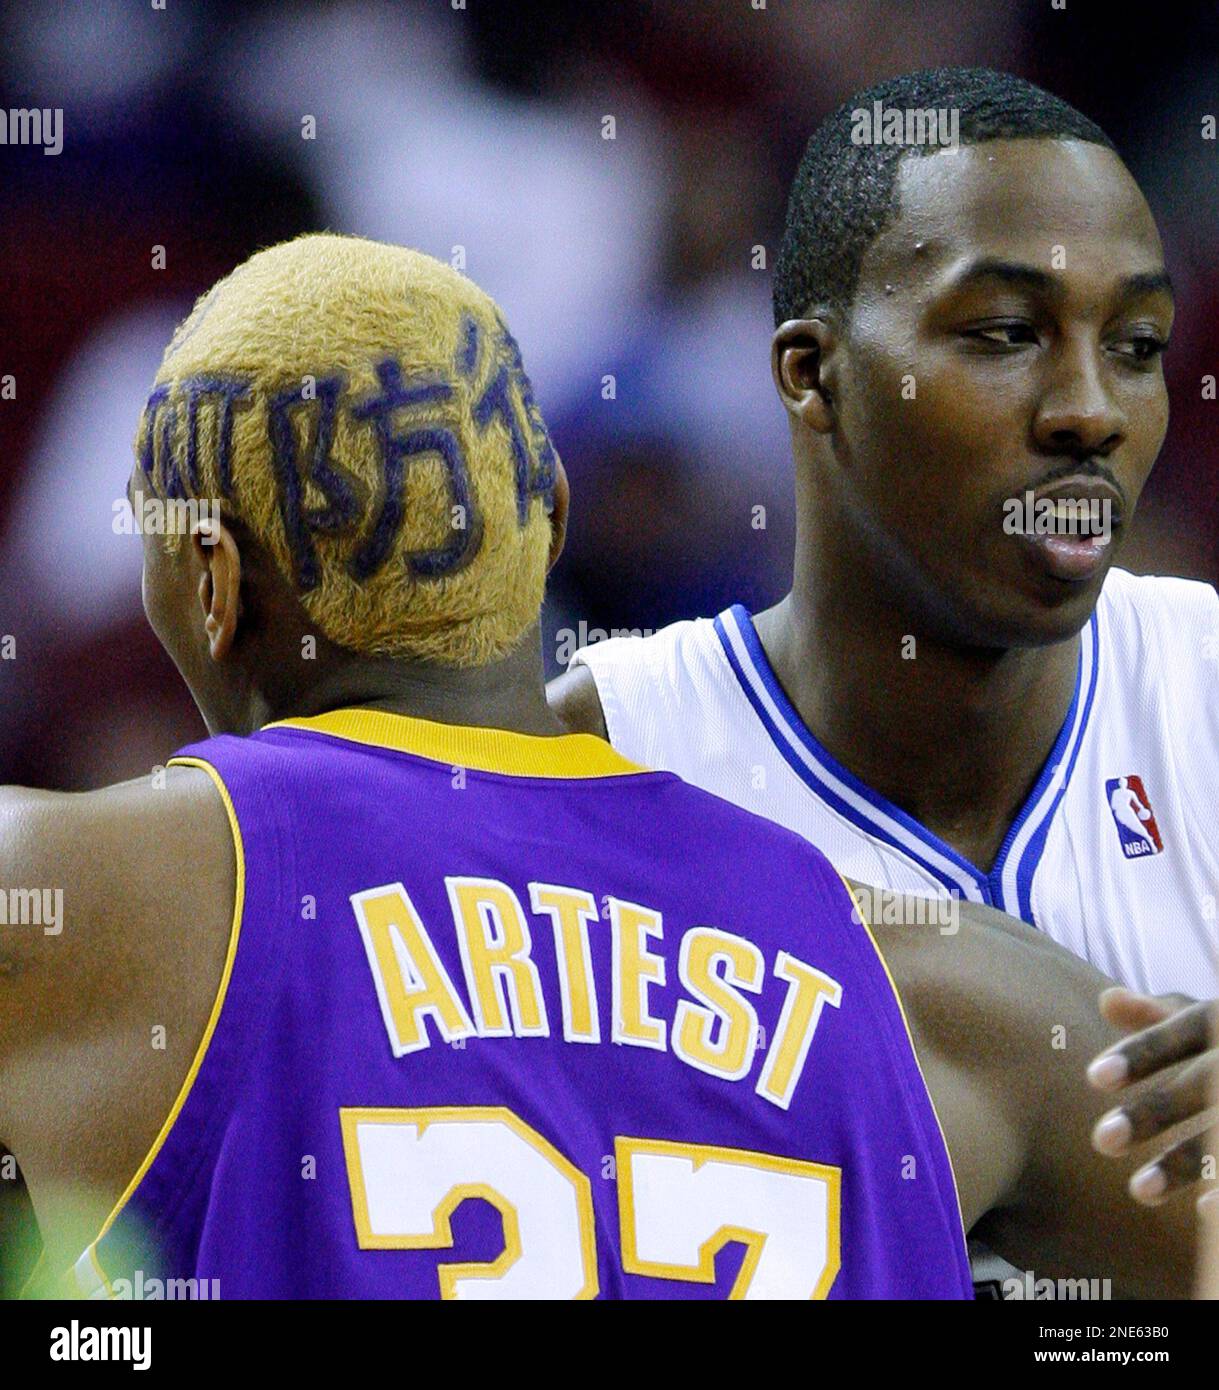 Los Angeles Lakers forward Ron Artest, left, with hair dyed blonde and  purple letters in three different languages, greets Orlando Magic center  Dwight Howard prior to the start of an NBA basketball